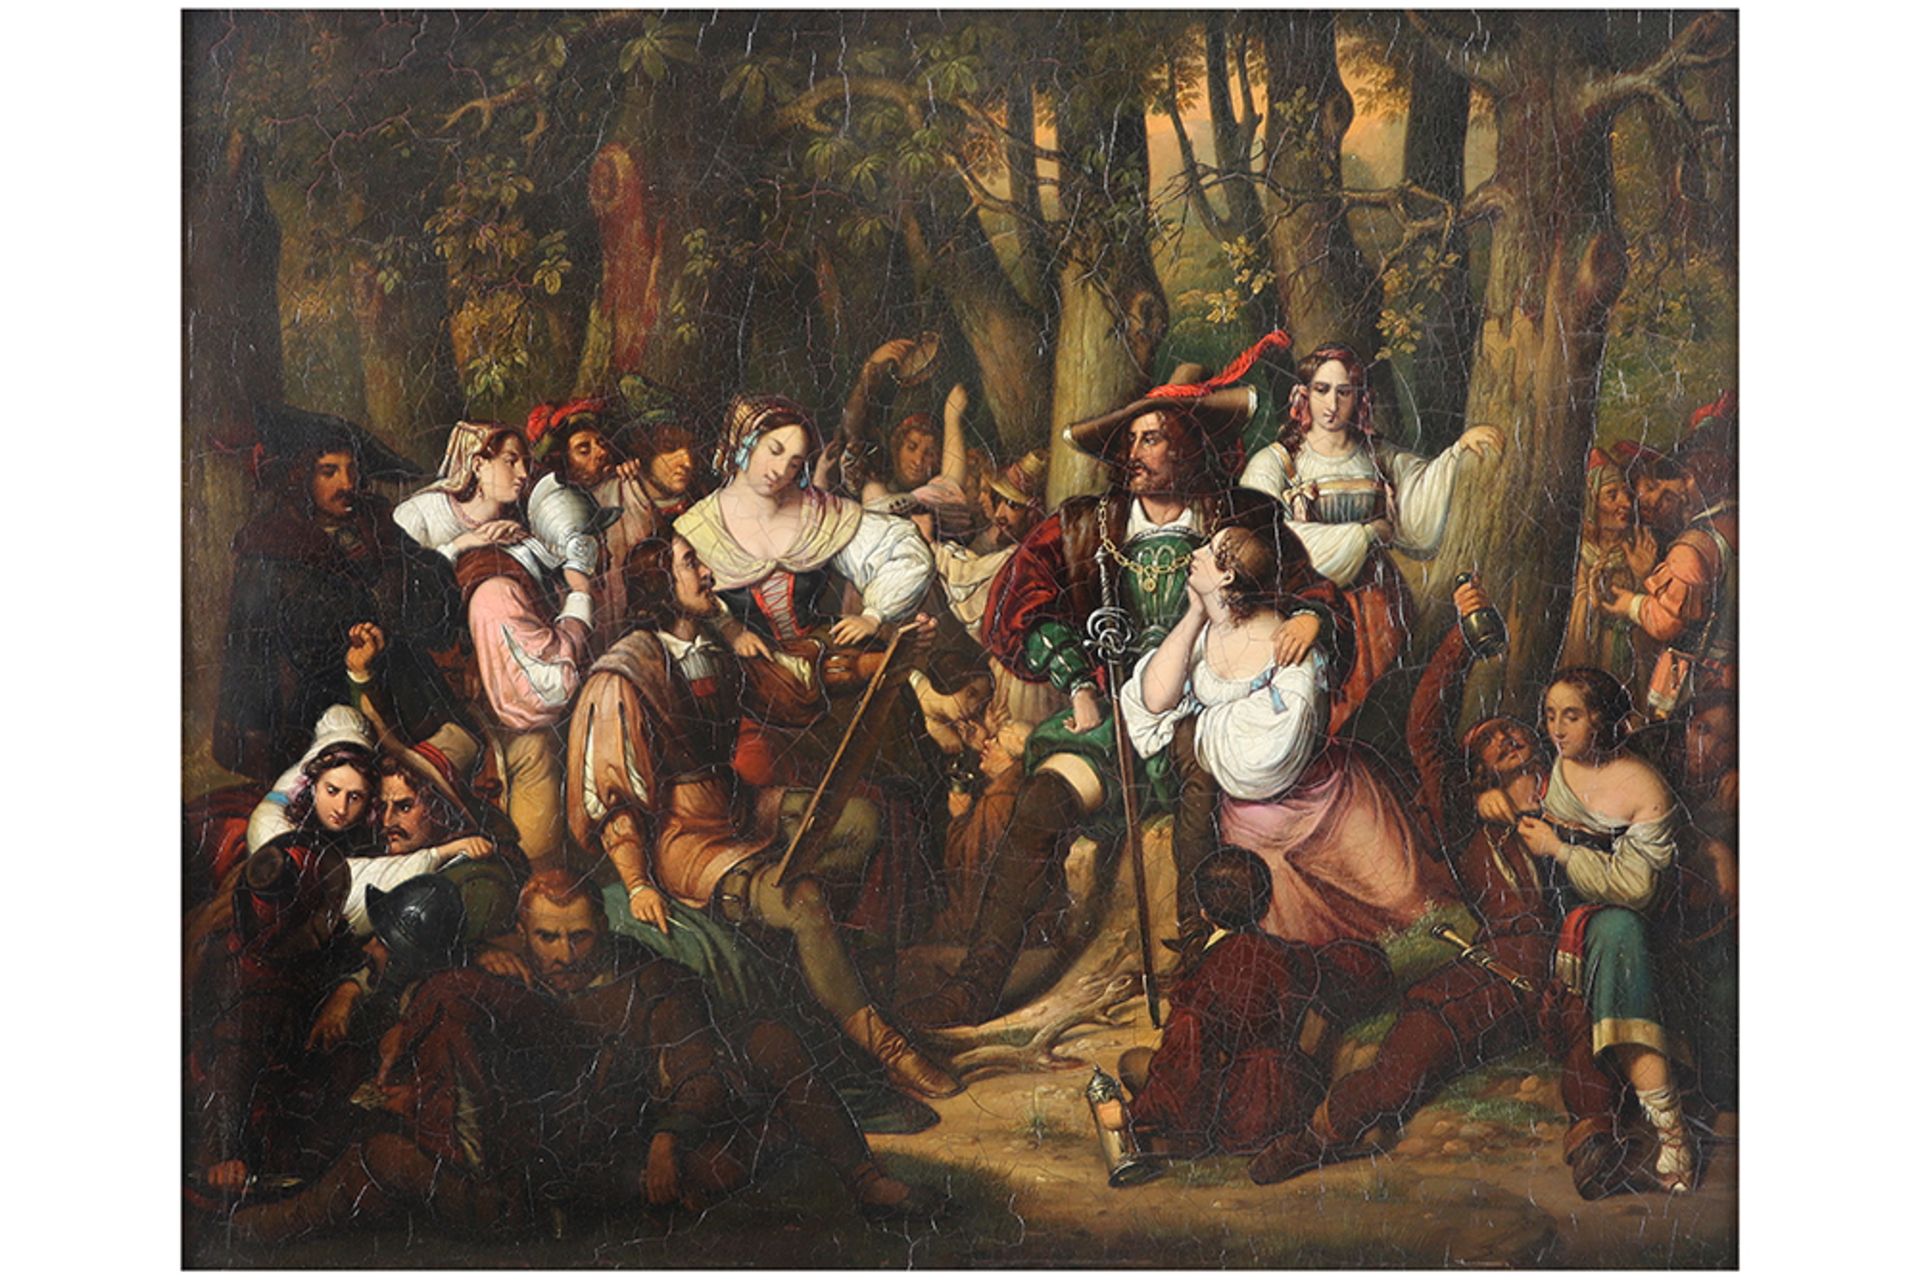 20th Cent. oil on copper with a 17th Cent. style theme with lots of figures || 20ste eeuws